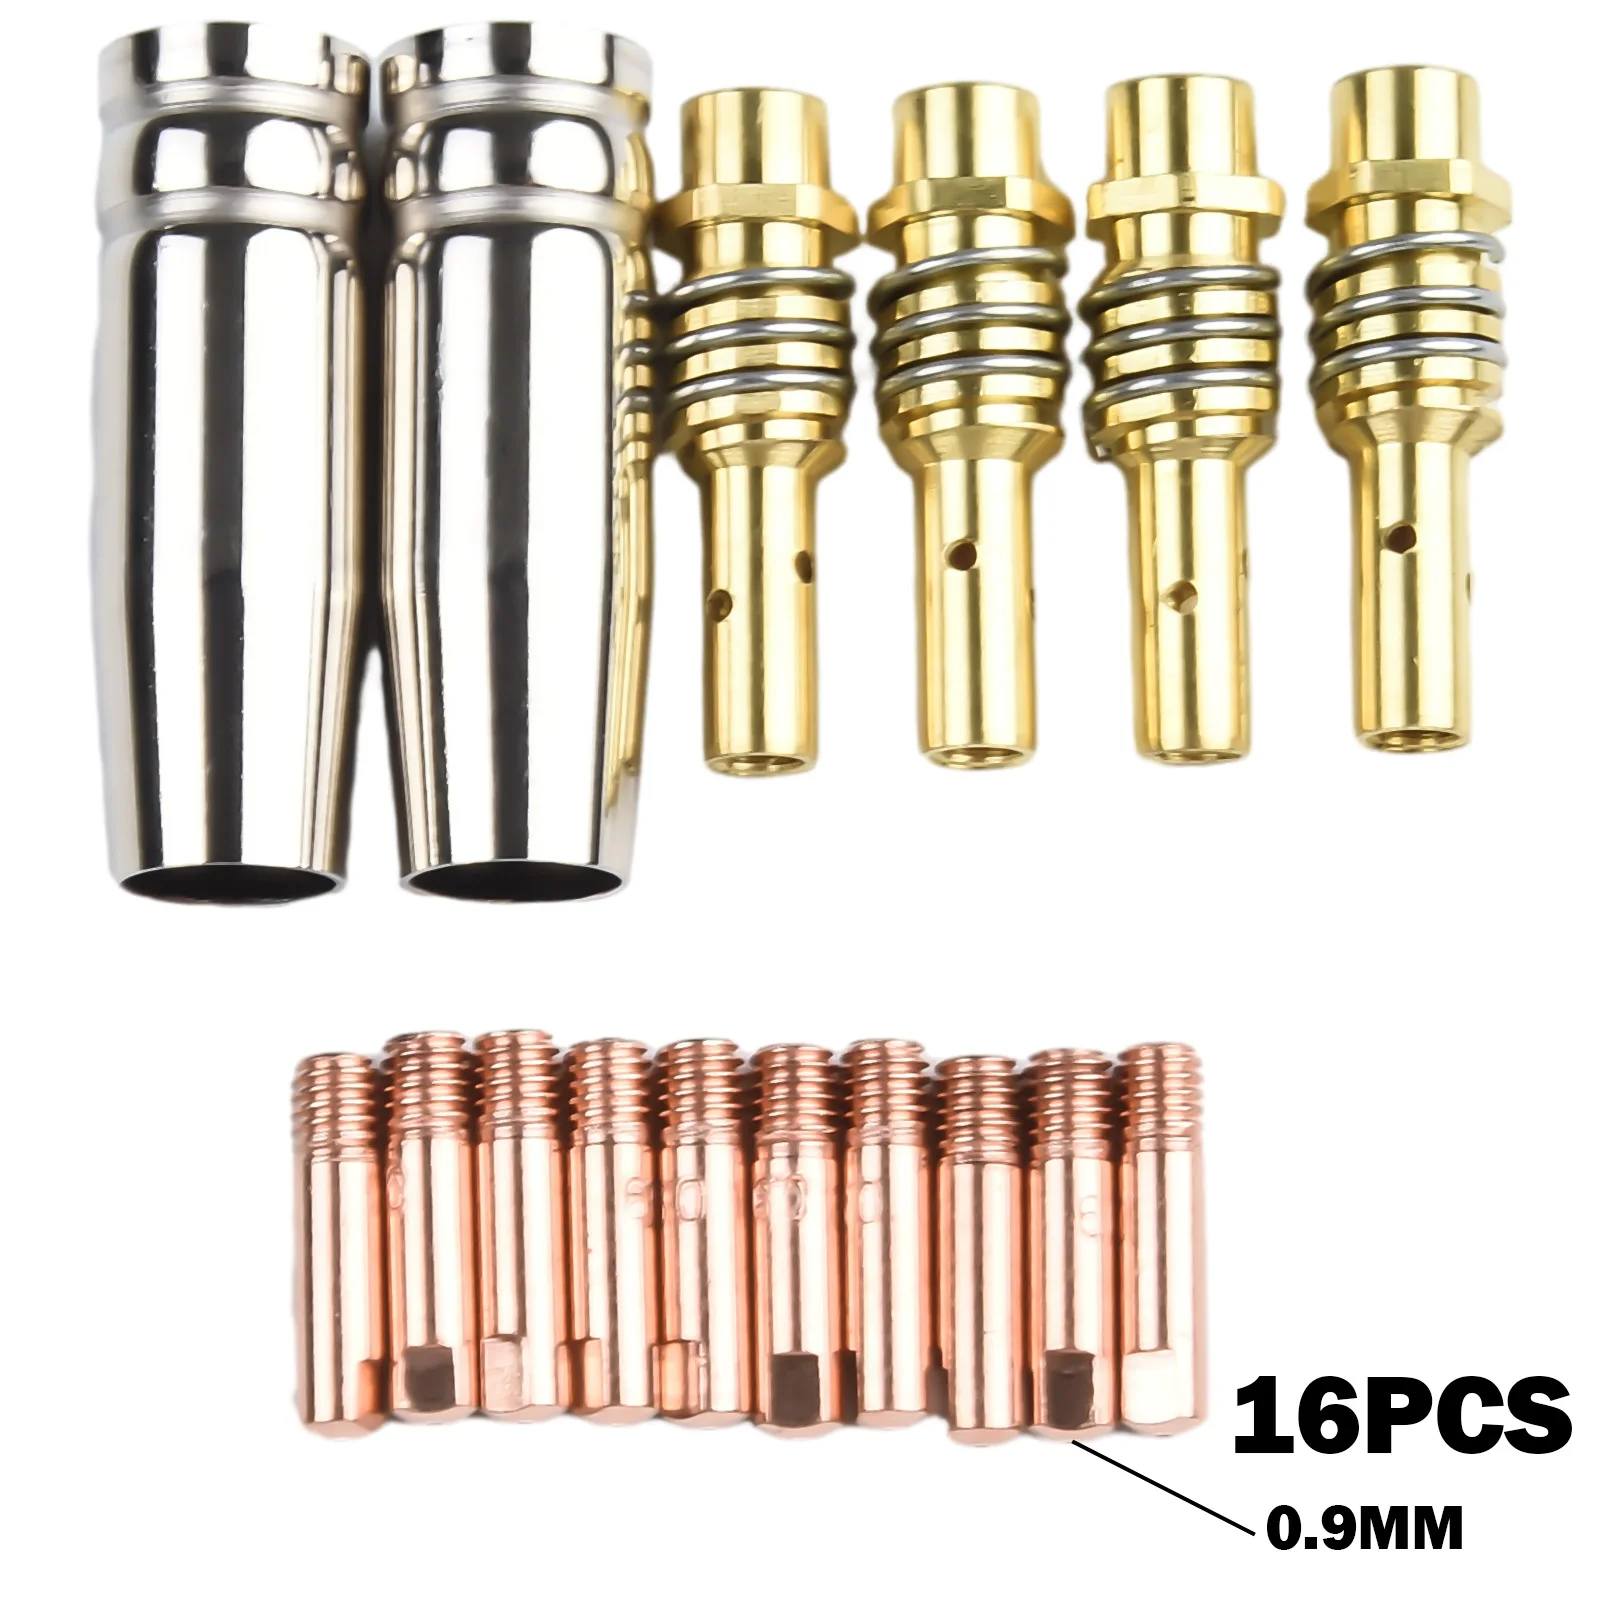 Mig Contact Tip Consumables 16PC MIG Welding MB15 15AK Contact Tip 0.8/1.0/1.2mm Conductive Tips Protective Nozzles Tip Holder mig contact tip consumables 16pc mig welding mb15 15ak contact tip 0 8 1 0 1 2mm conductive tips protective nozzles tip holder